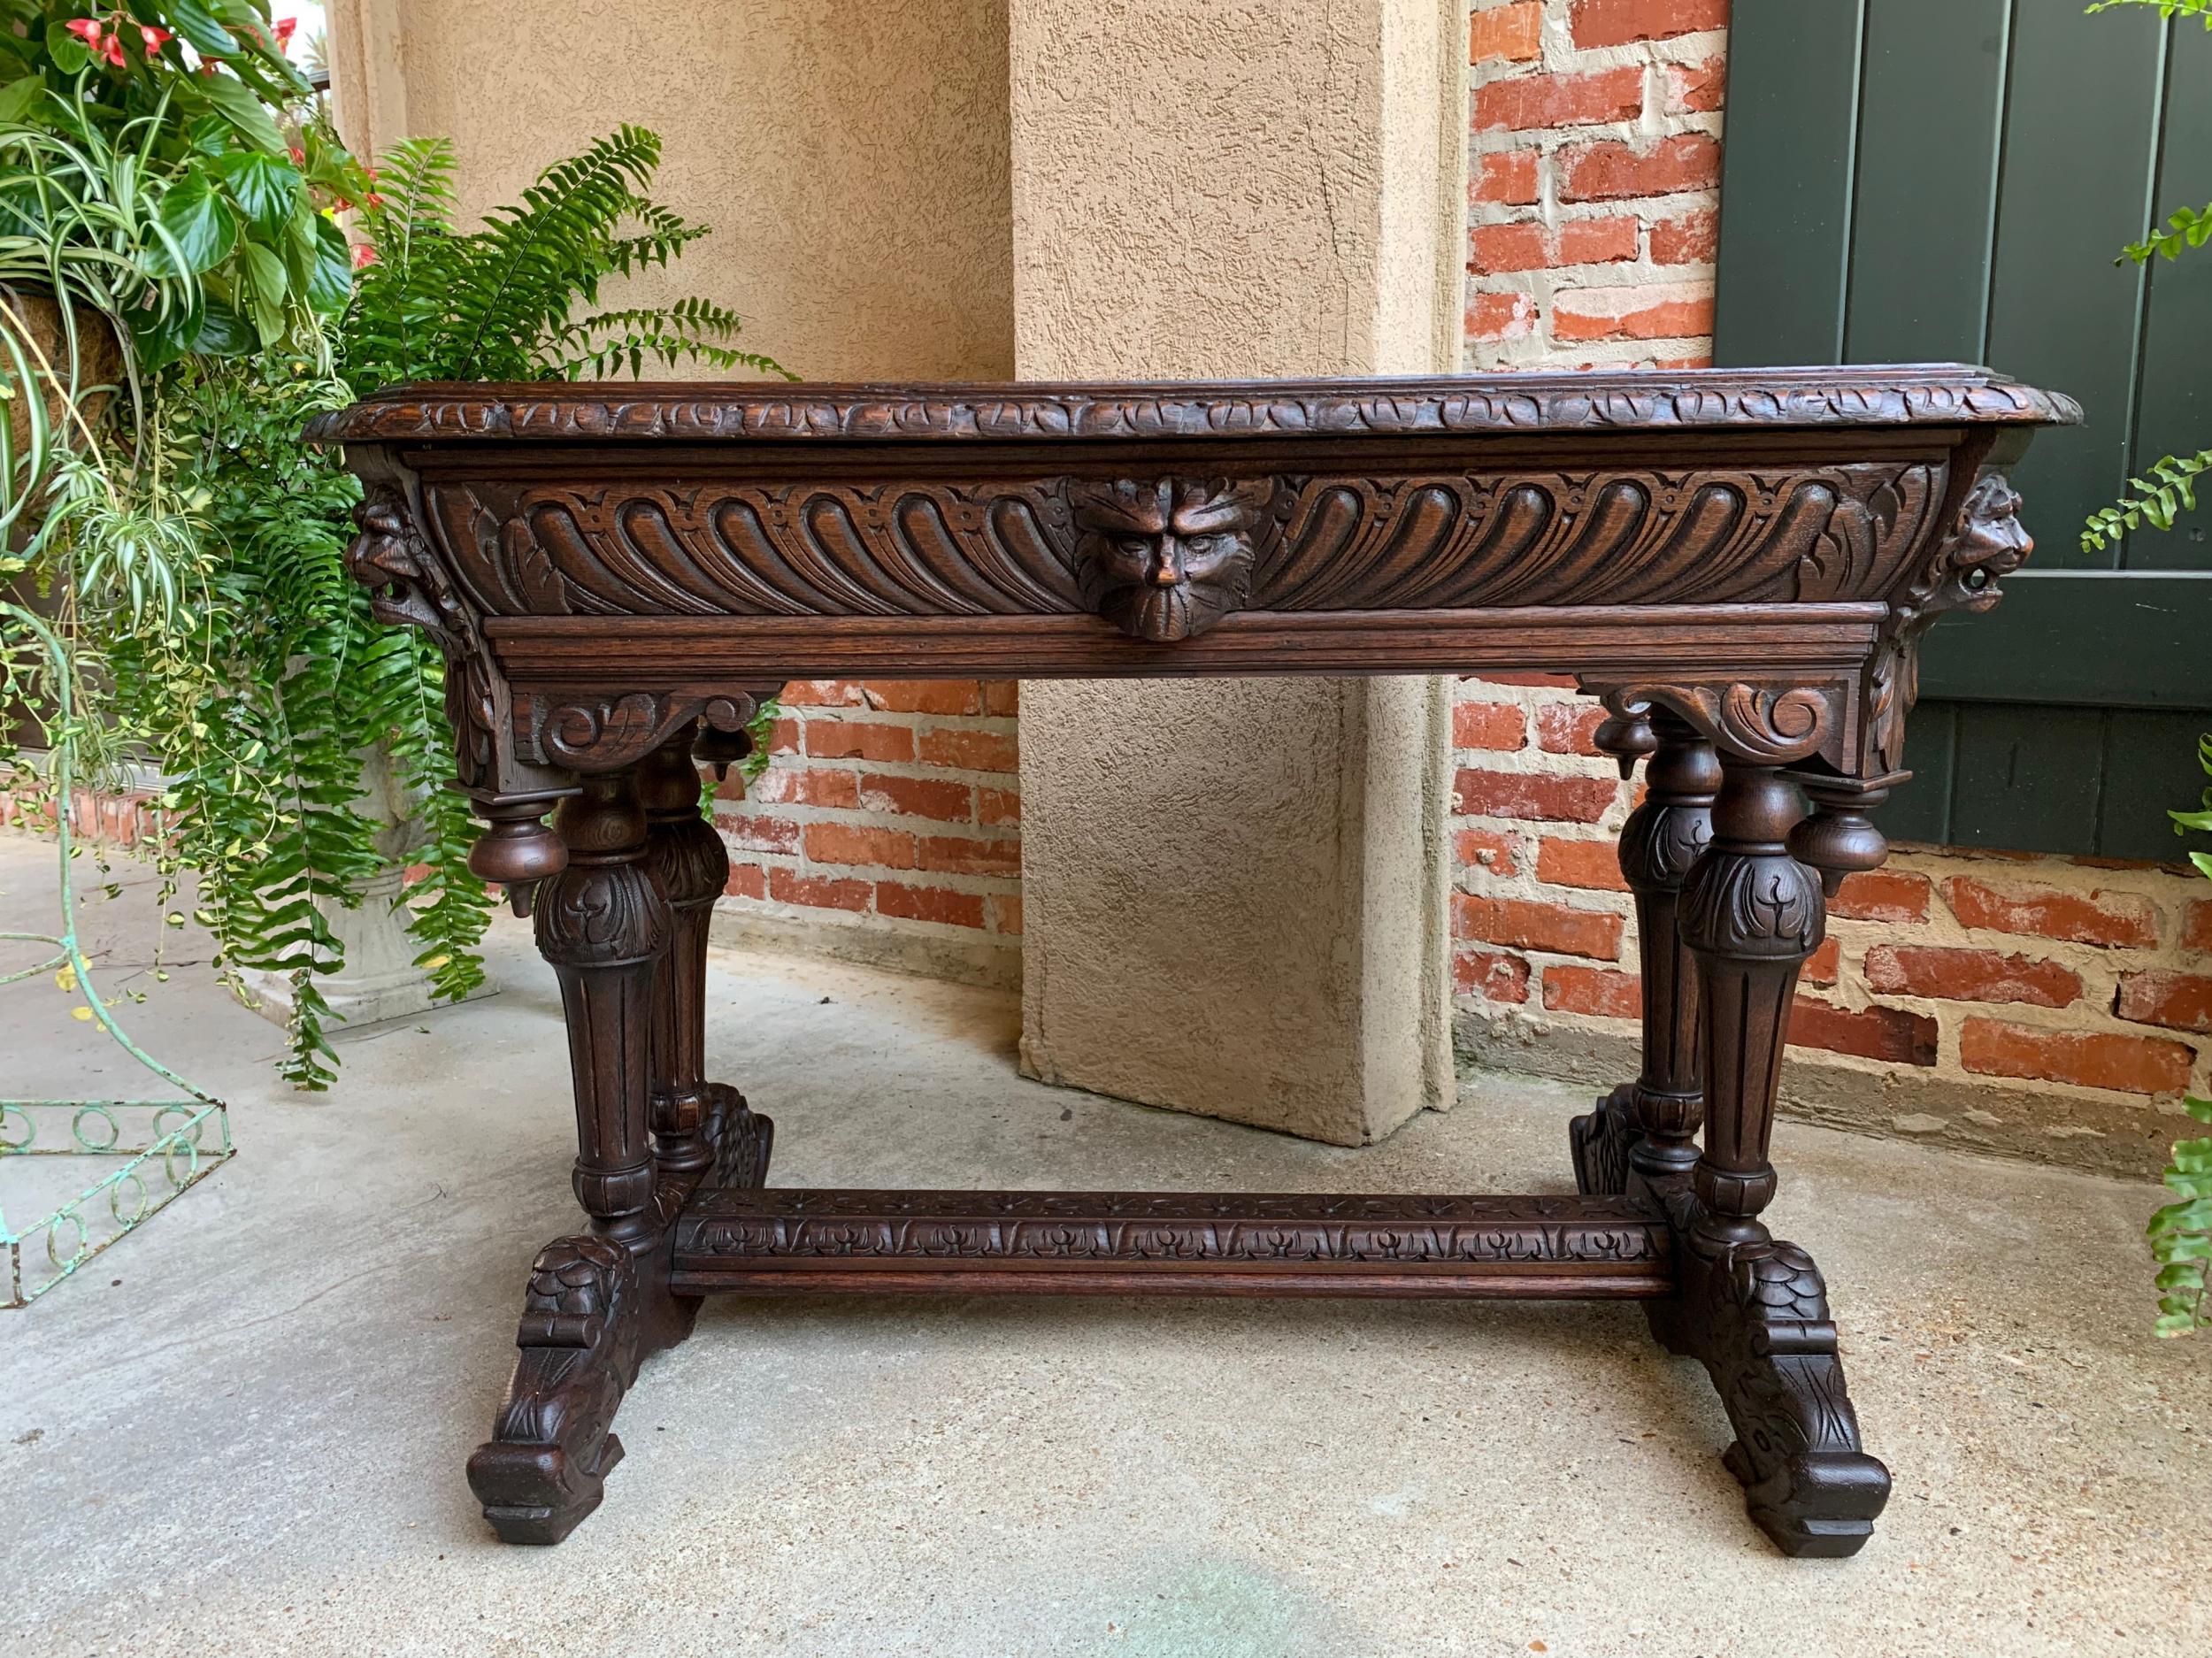 Antique French carved oak dolphin sofa table desk Renaissance Gothic 19th c

~Direct from France~
An elegant antique French carved library table or 